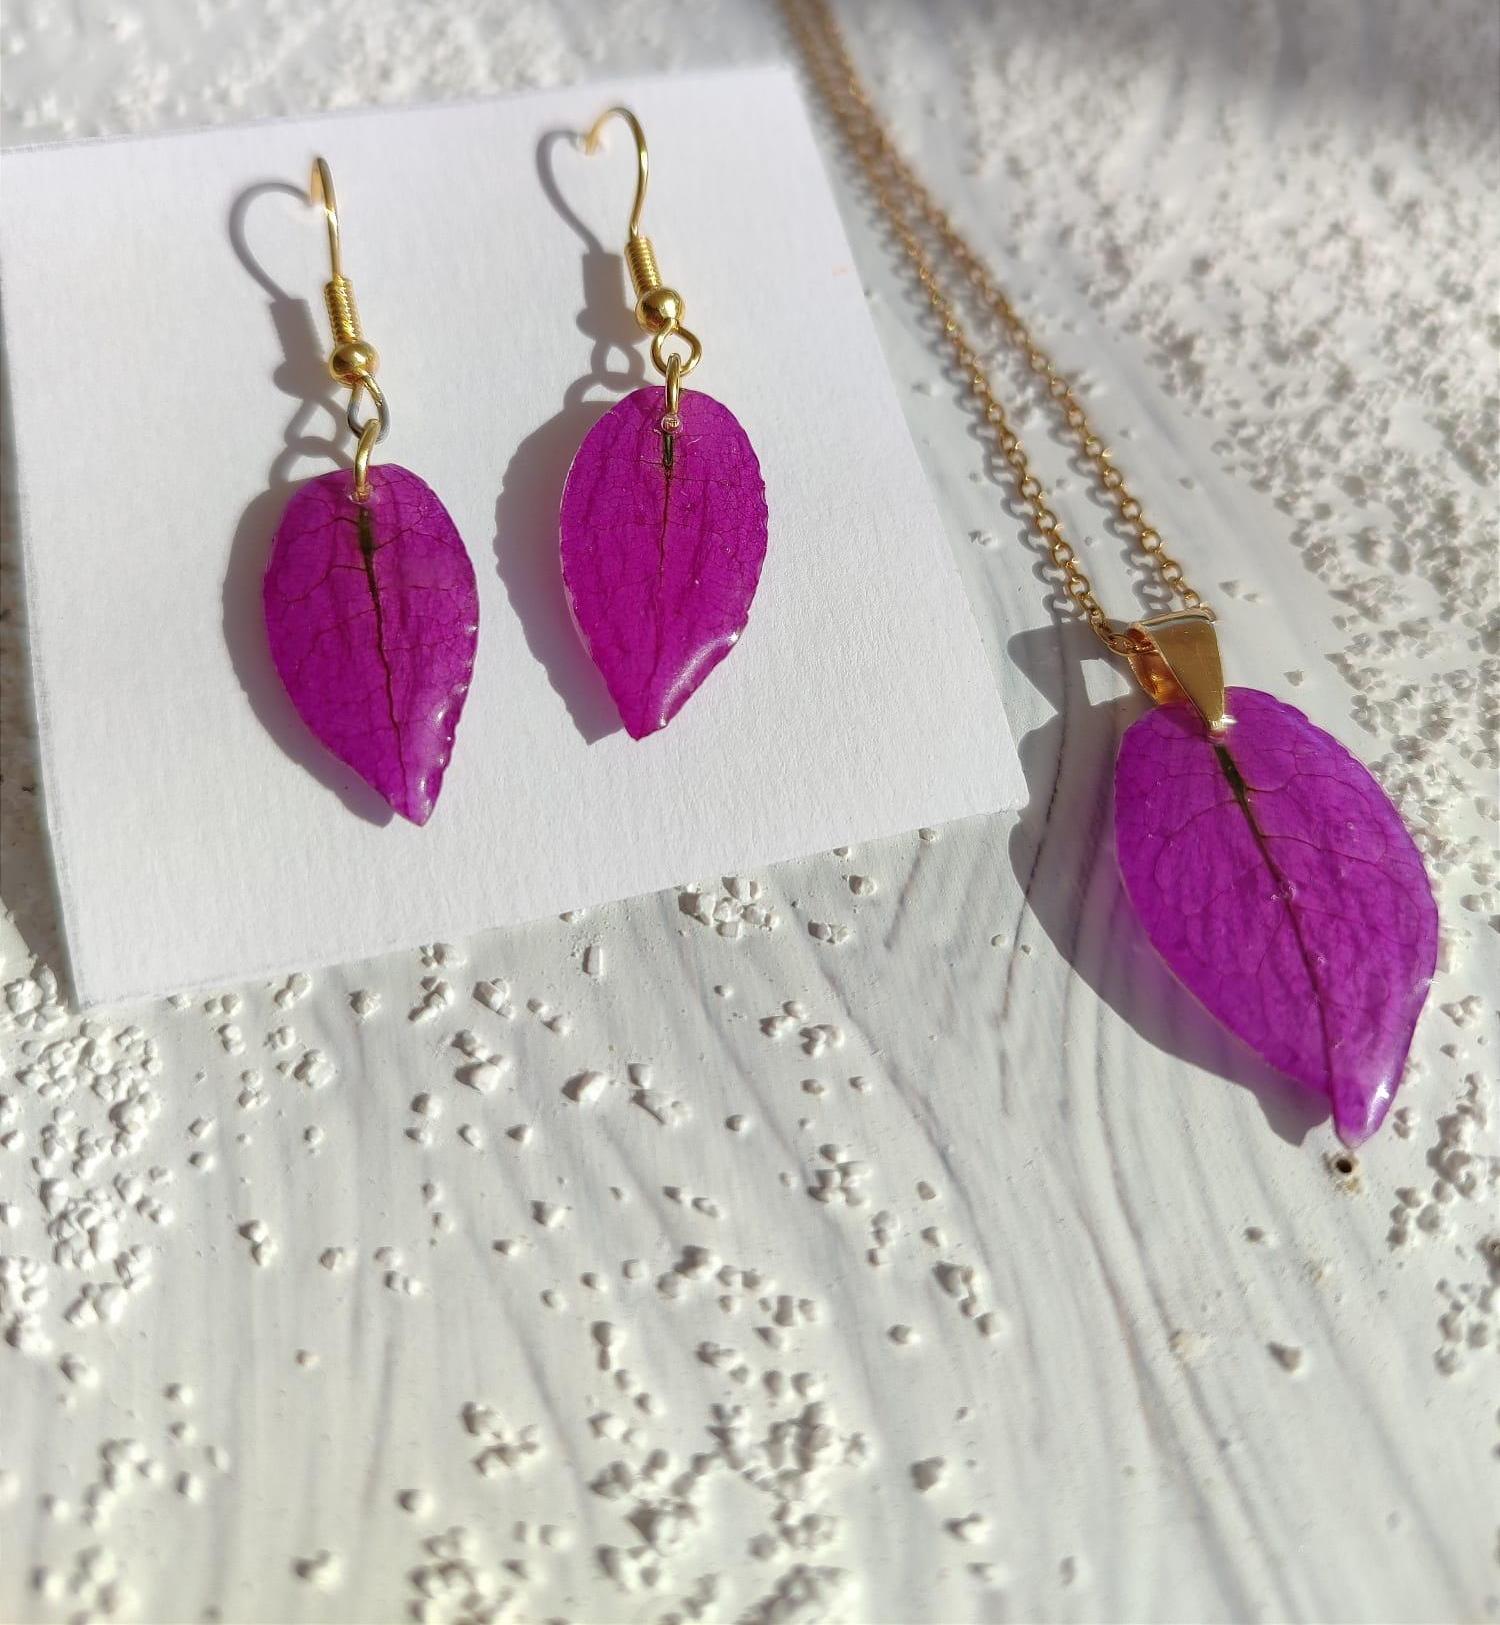 Earrings and Necklace With Petals With UV Resin